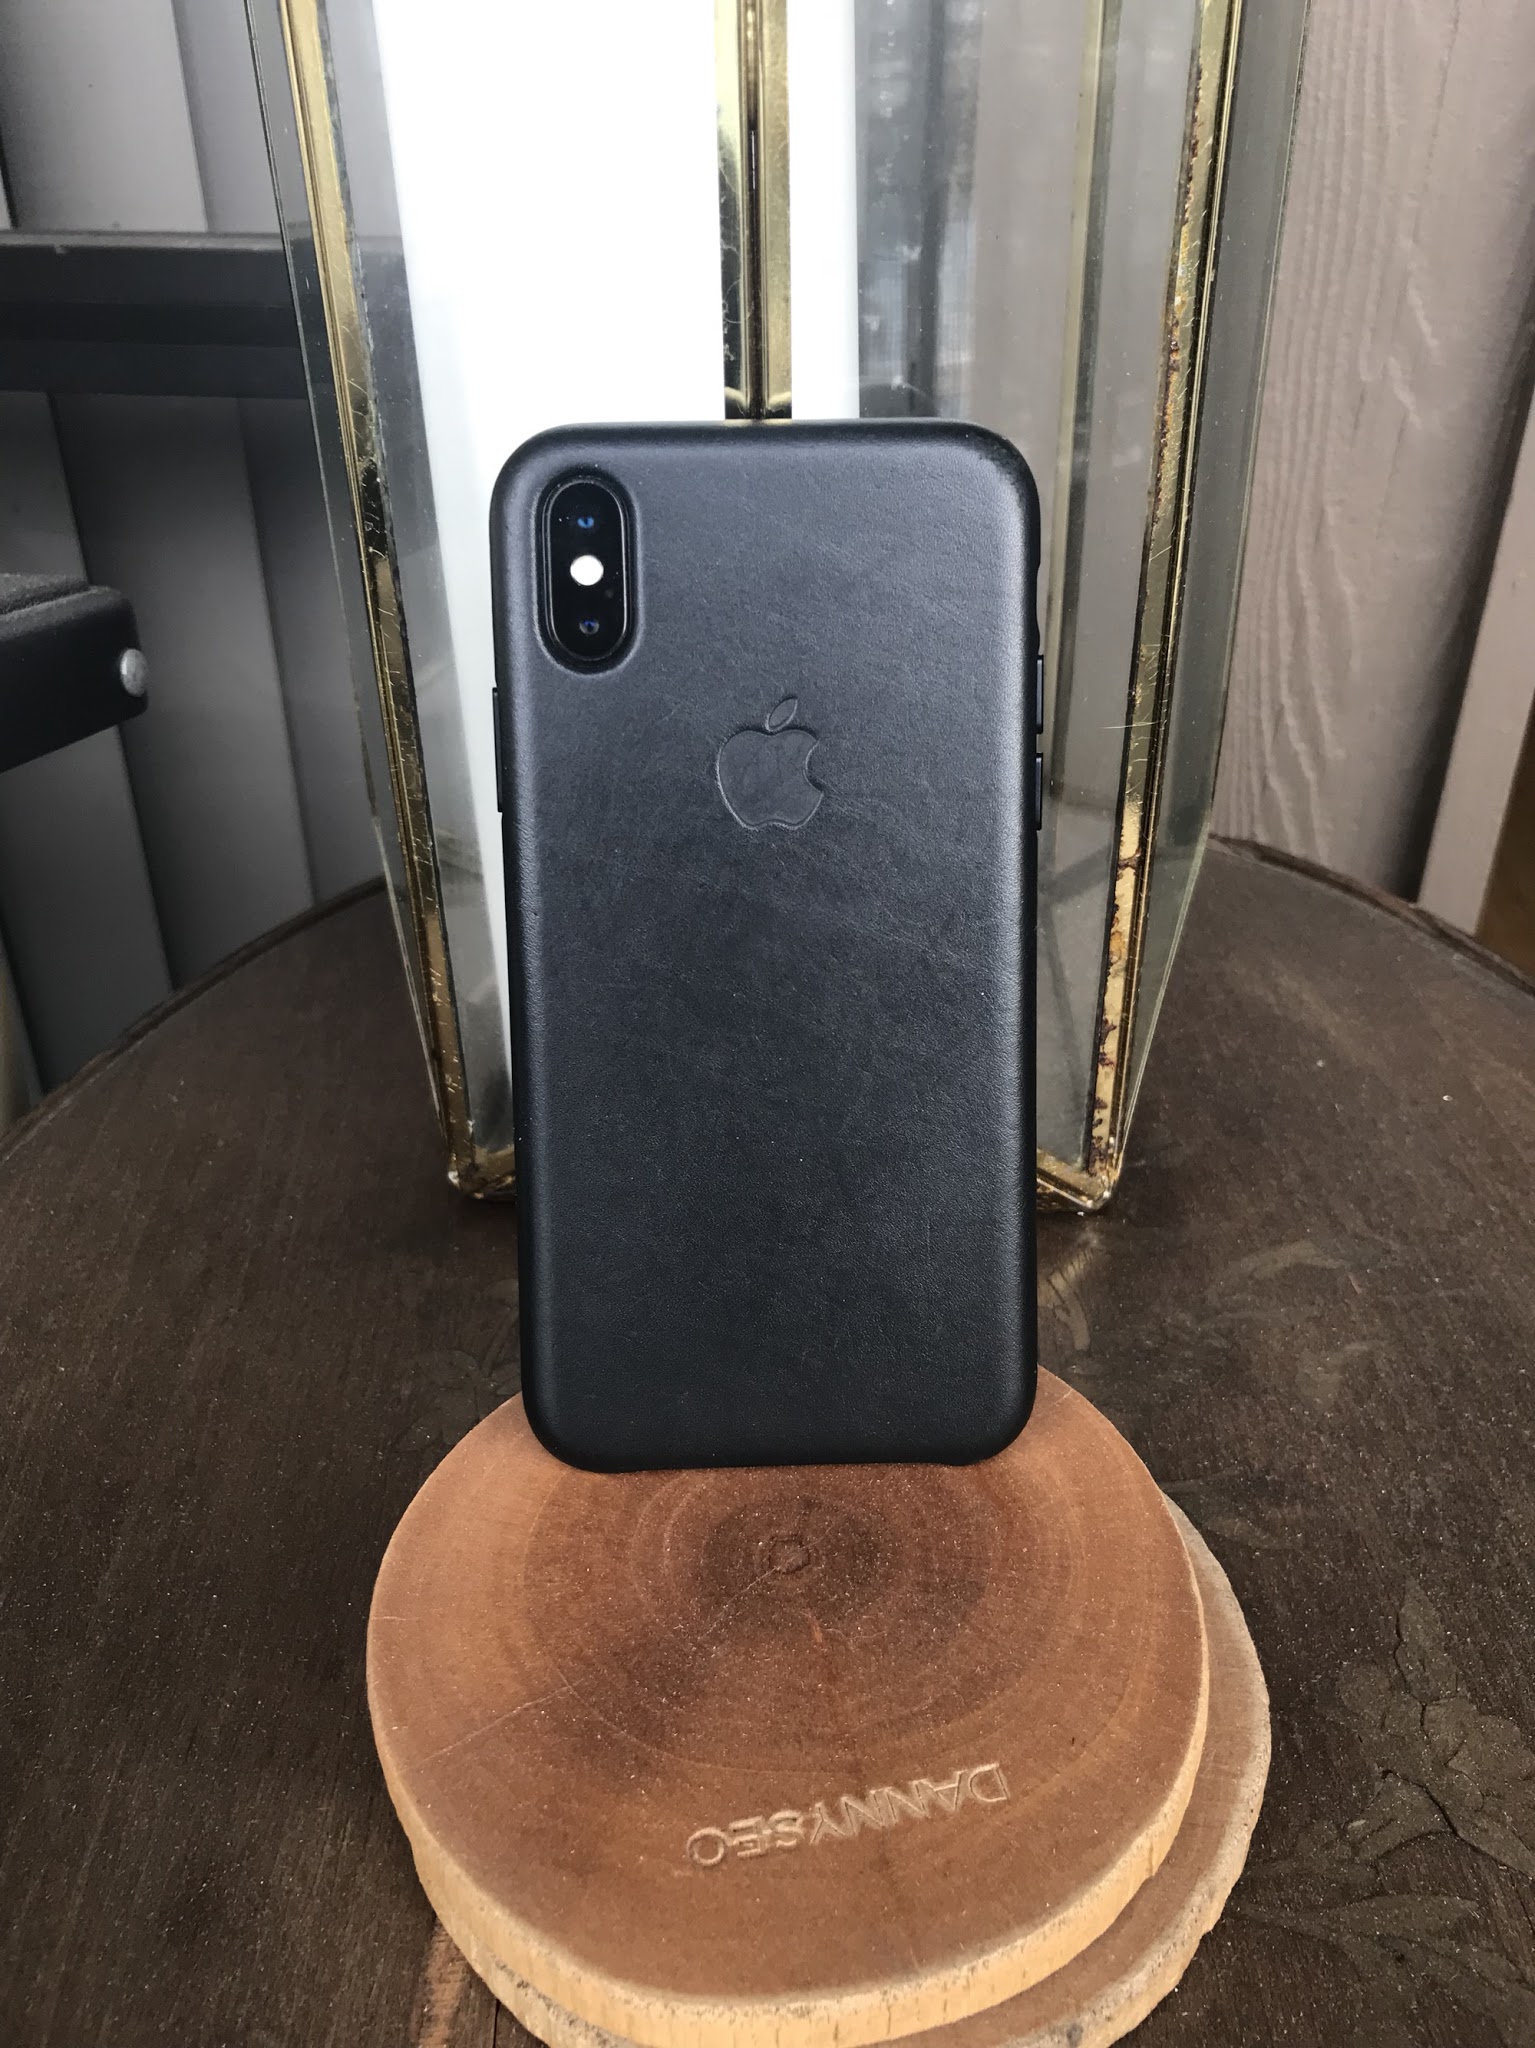 function Thoroughly tetrahedron iPhone X Leather Case Review: 4 Reasons to Buy & 3 Not To